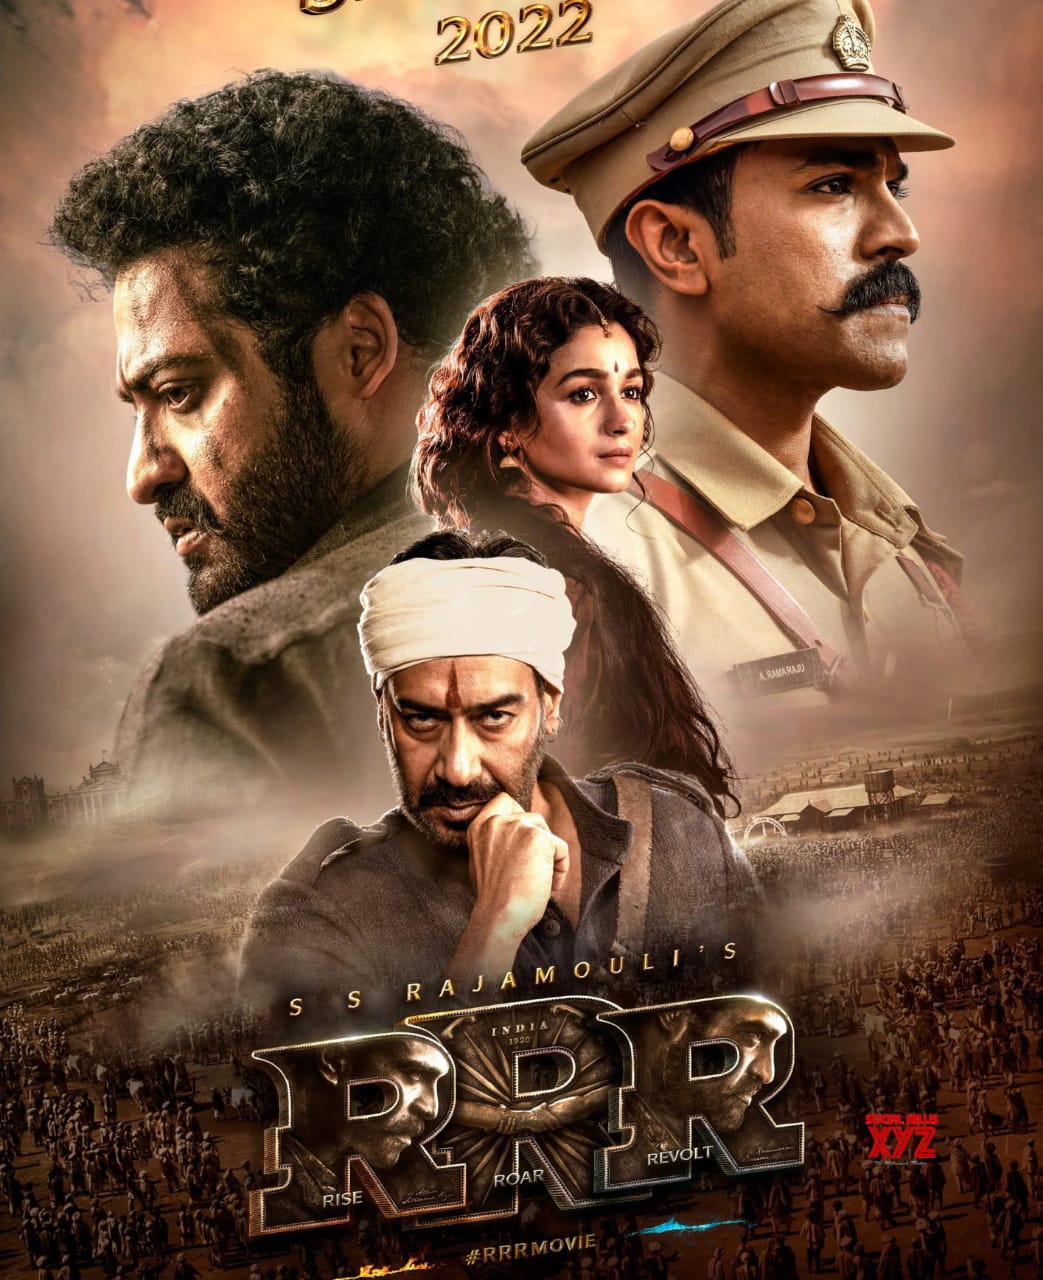 Rrr Full Movie Hindi Dubbed Download Mp4moviez in High Definition [HD]